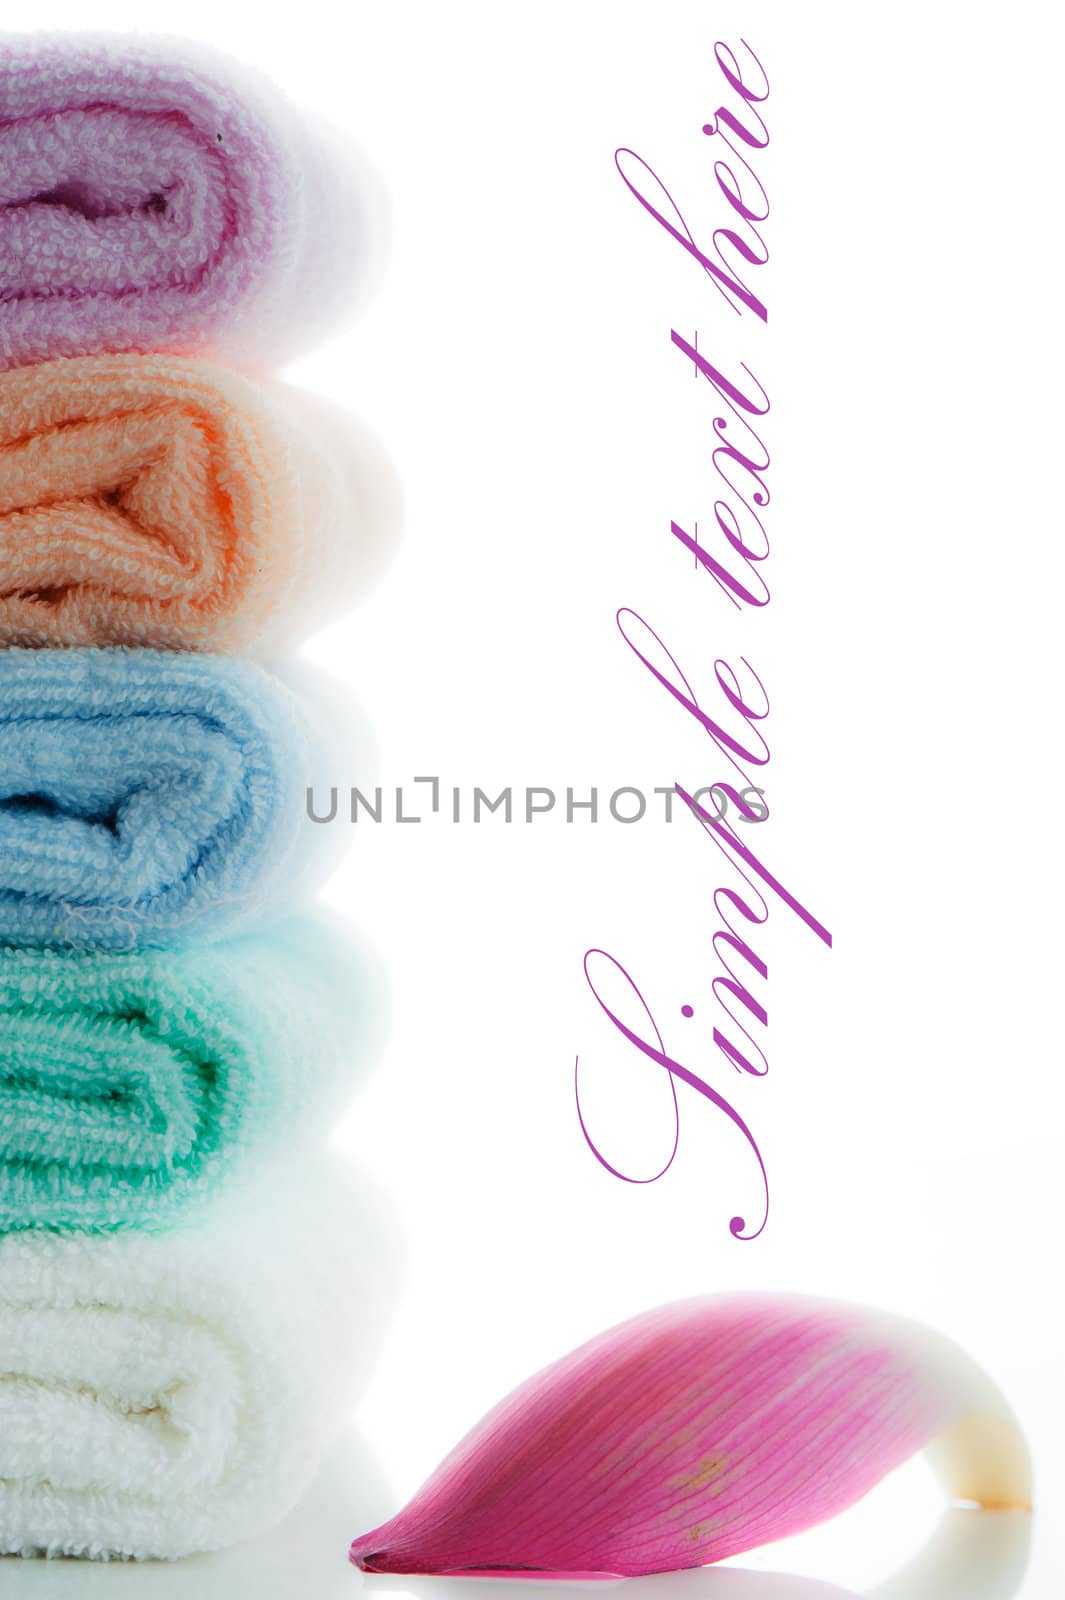 multicolor towels stacked with a lotus petal on white background and area for your text